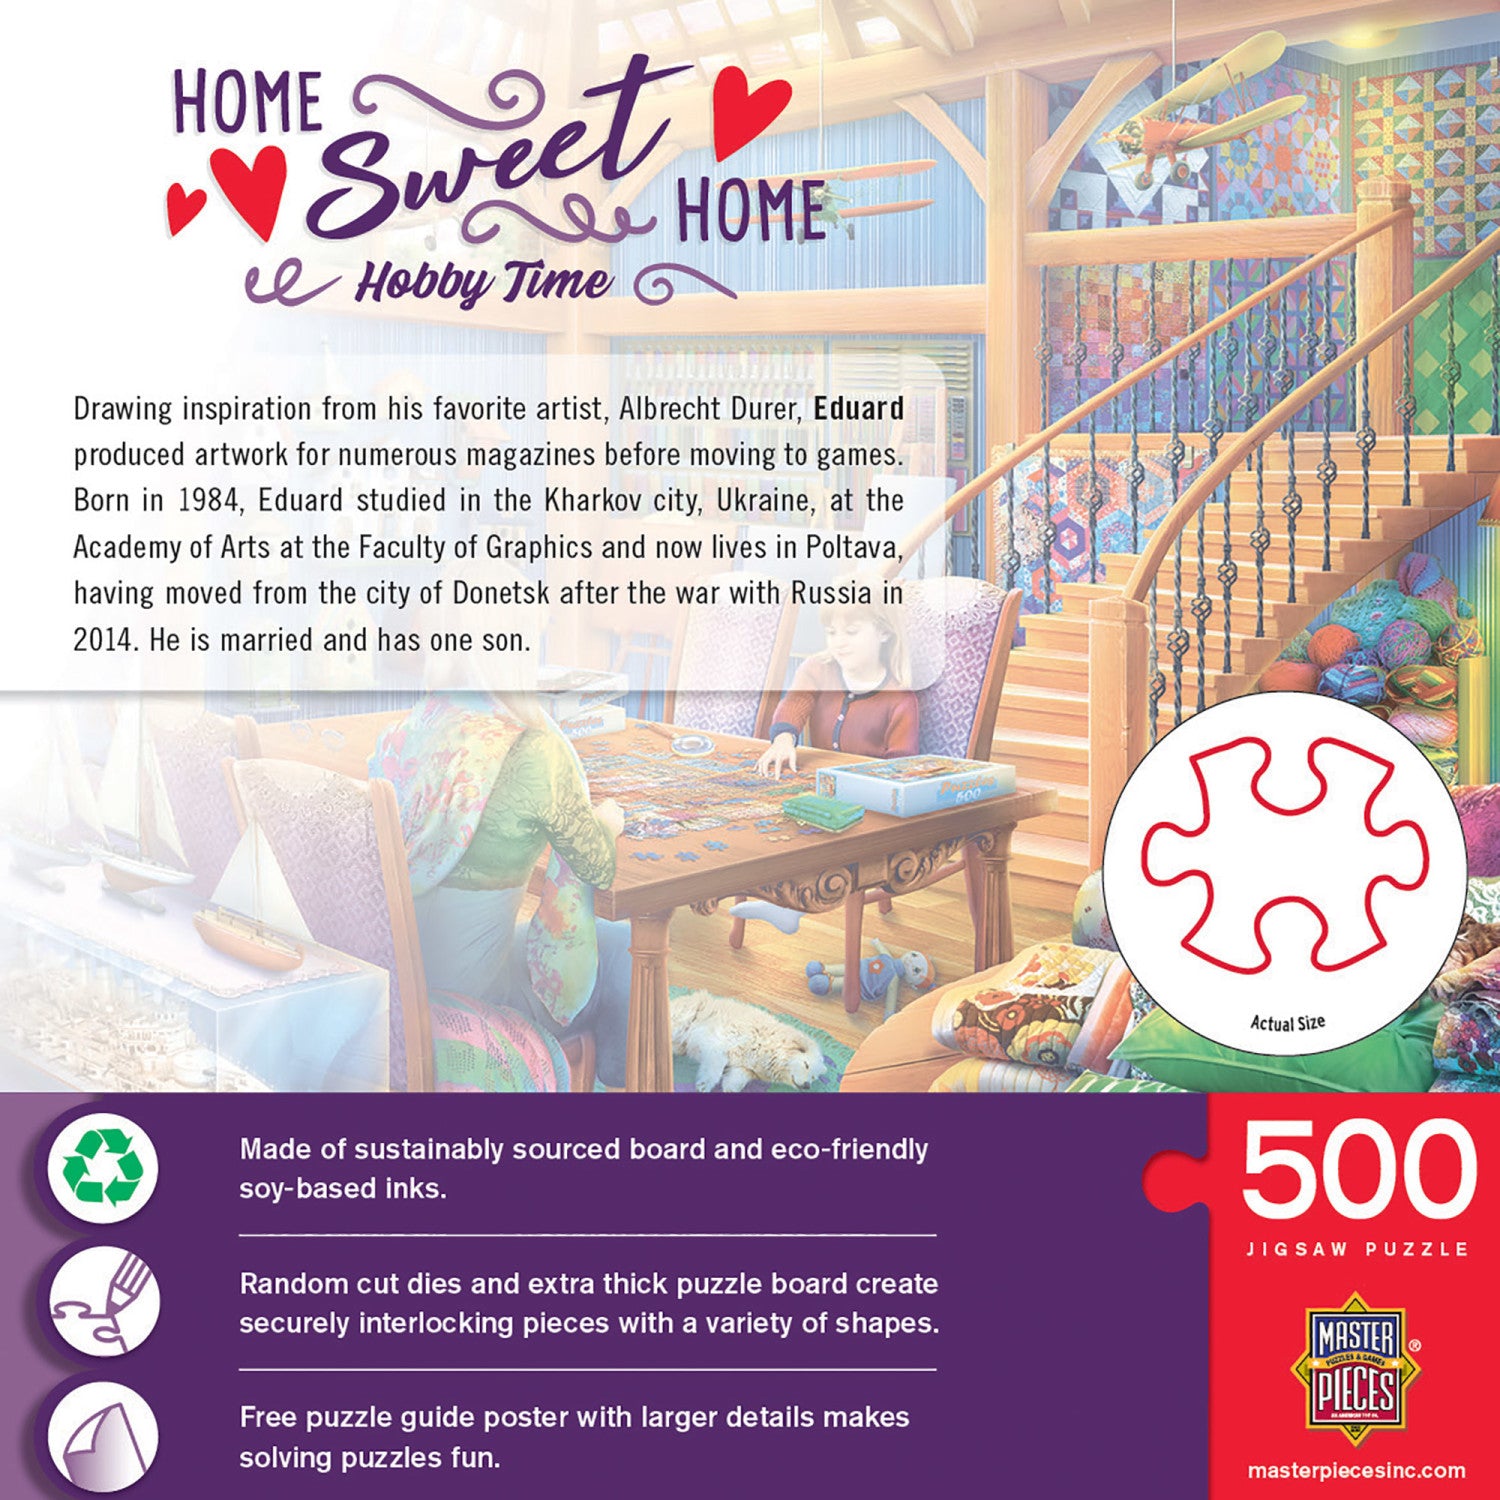 Home Sweet Home - Hobby Time 500 Piece Jigsaw Puzzle